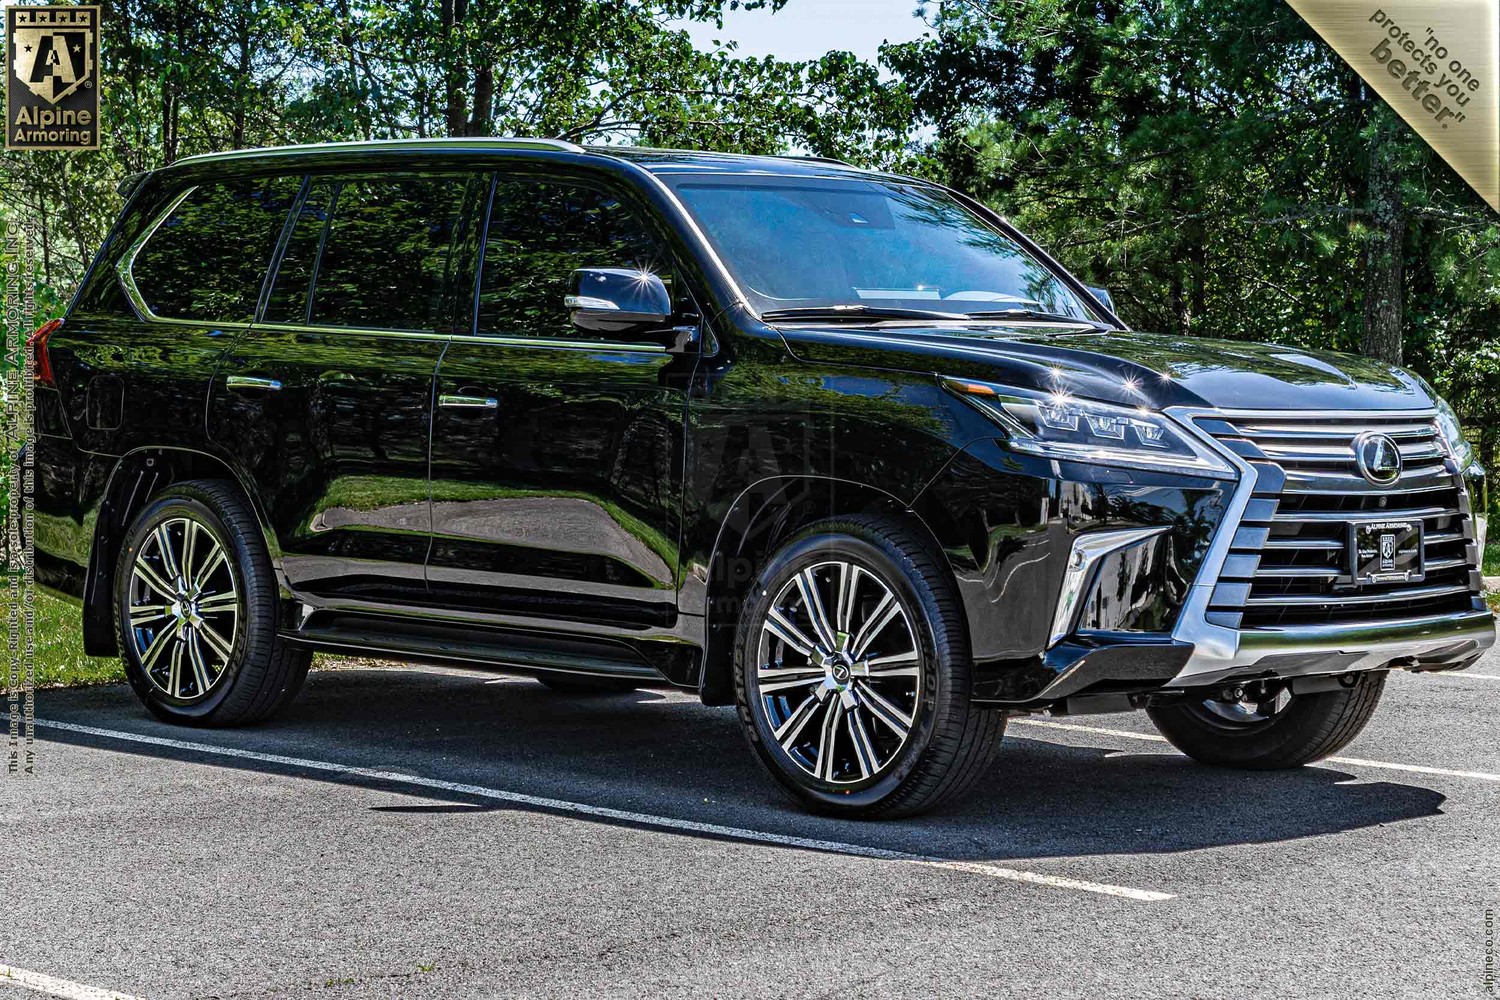 New Inventory armored Lexus LX570 Level A9/B6+  Exterior & Interior Images VIN:5903